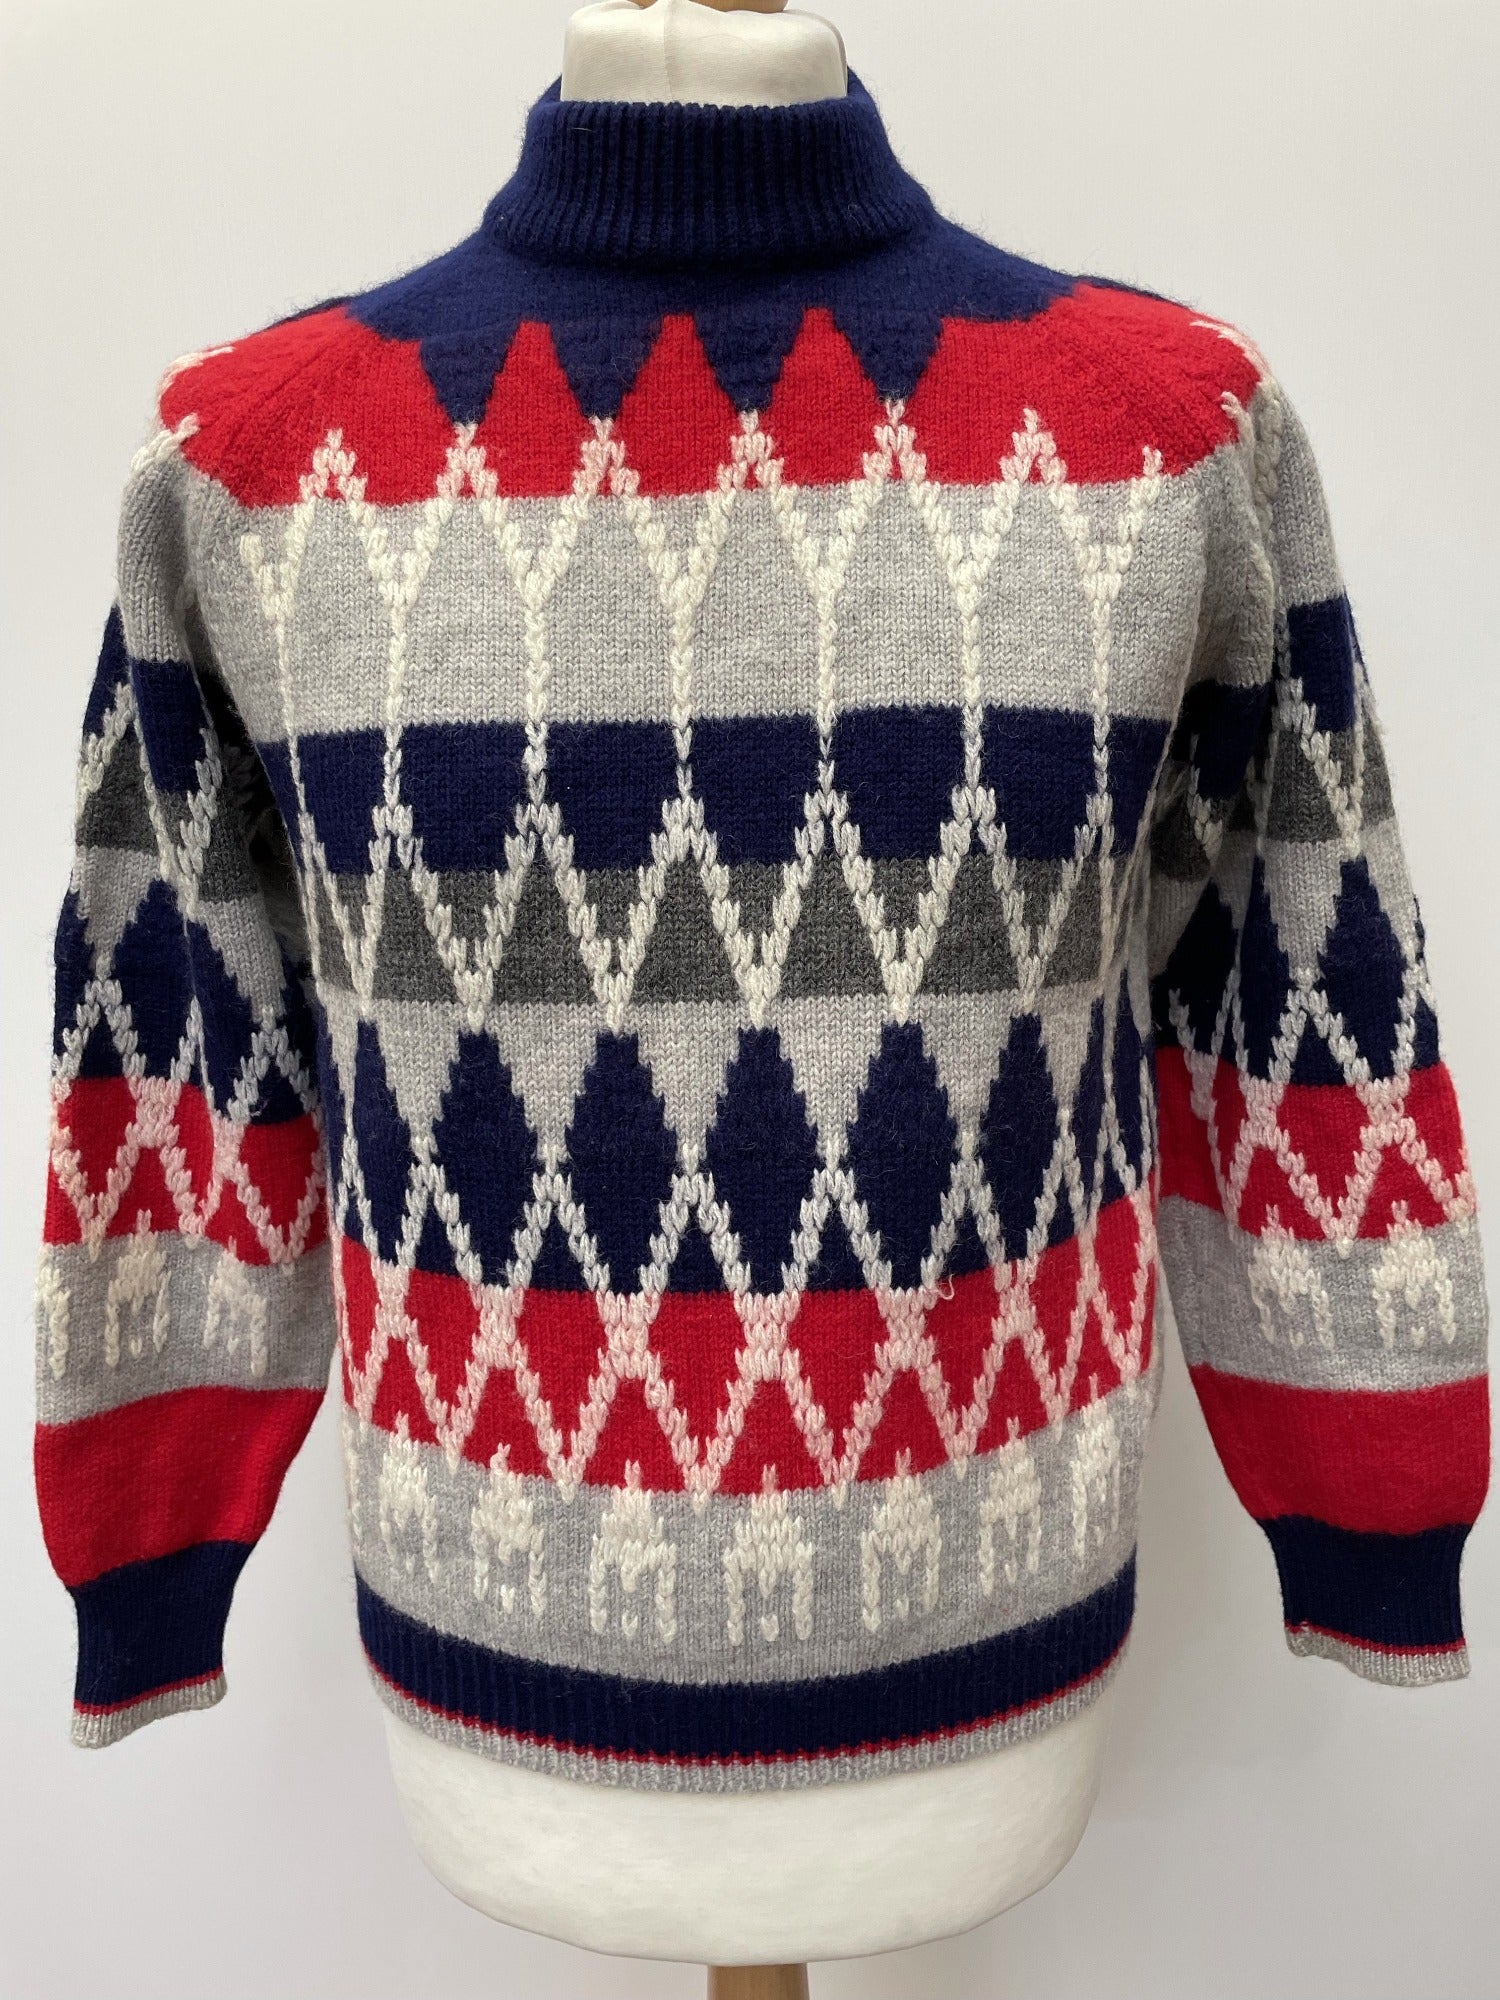 vintage  Urban Village Vintage  urban village  thick  ski jumper  simpsons  roll neck  Red  polo neck  patterned  pattern  mens  M  long sleeve  knitwear  knitted  knit  icelandic  high neck  heavyweight  elasticated  blue  50s  40s  1950s  1940s